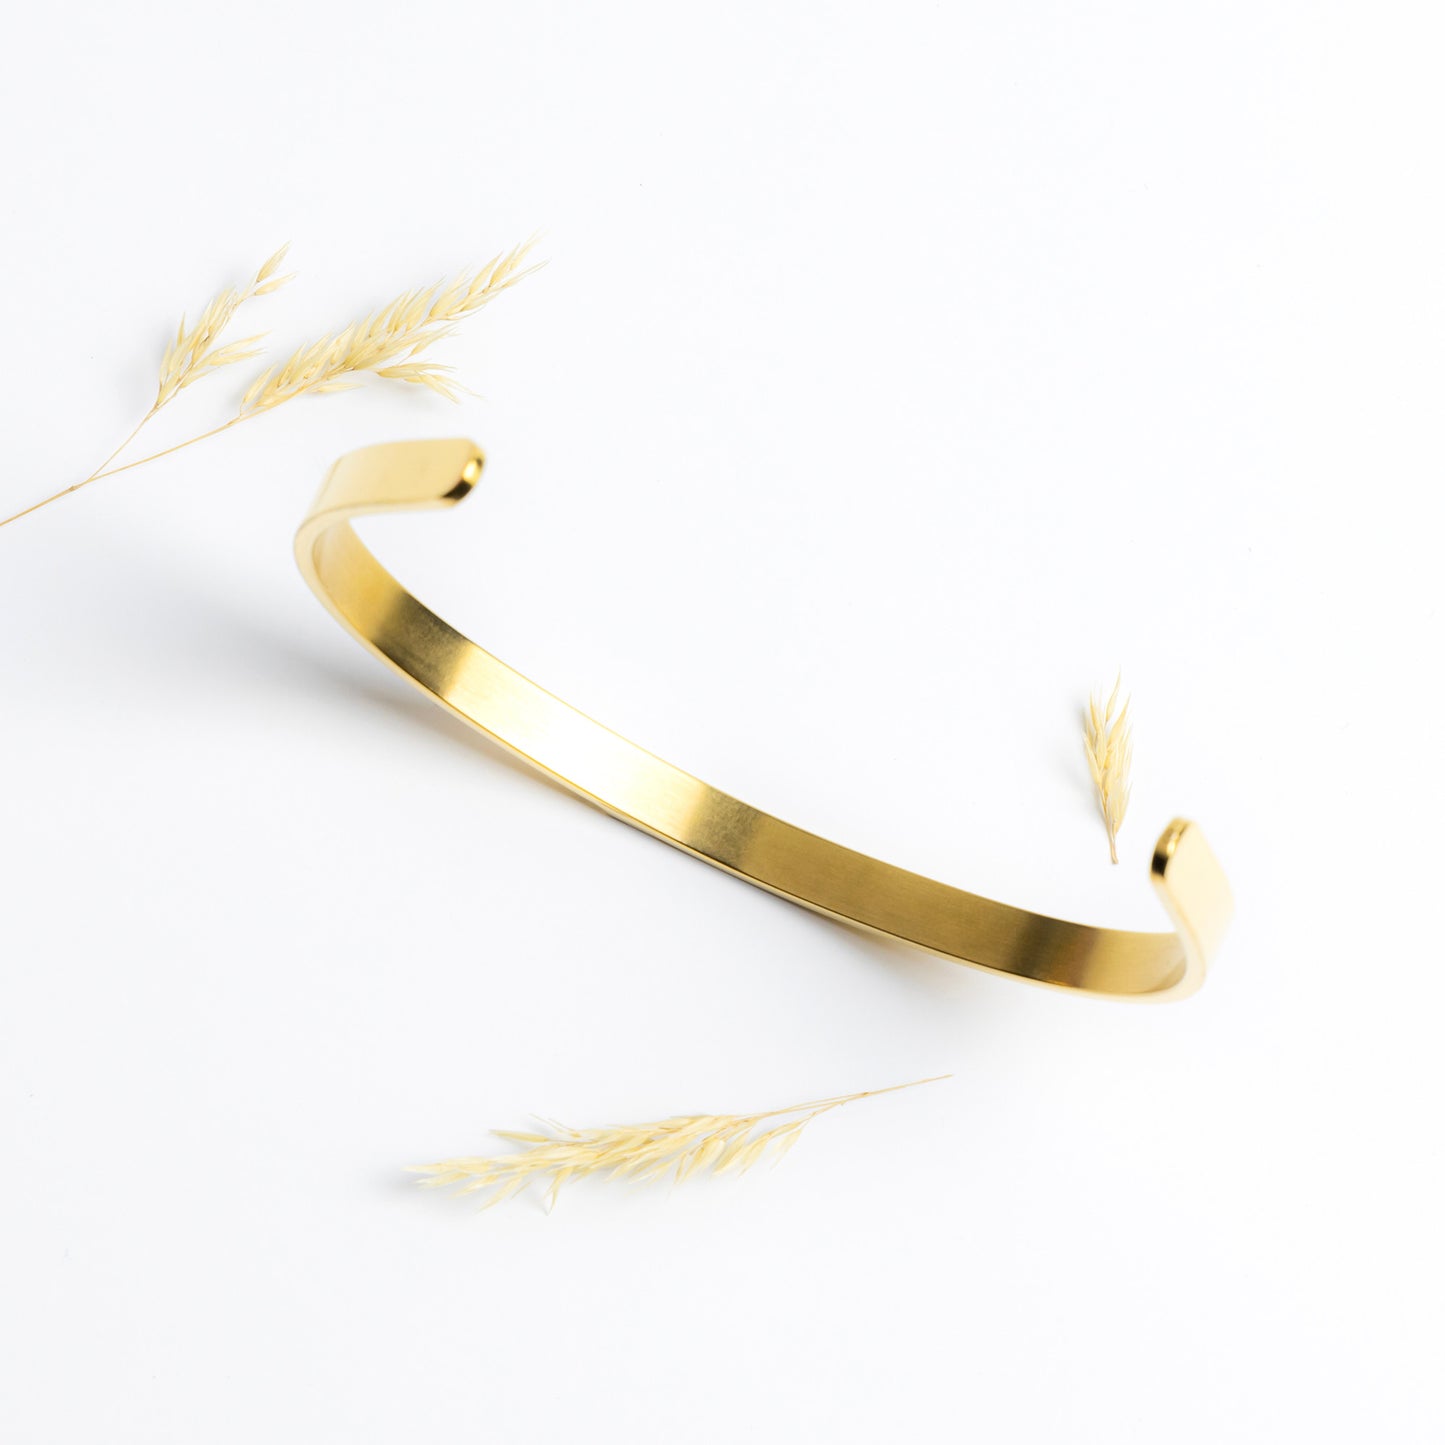 Laugh Often Cuff Bracelet, Gold, Rose Gold and Silver